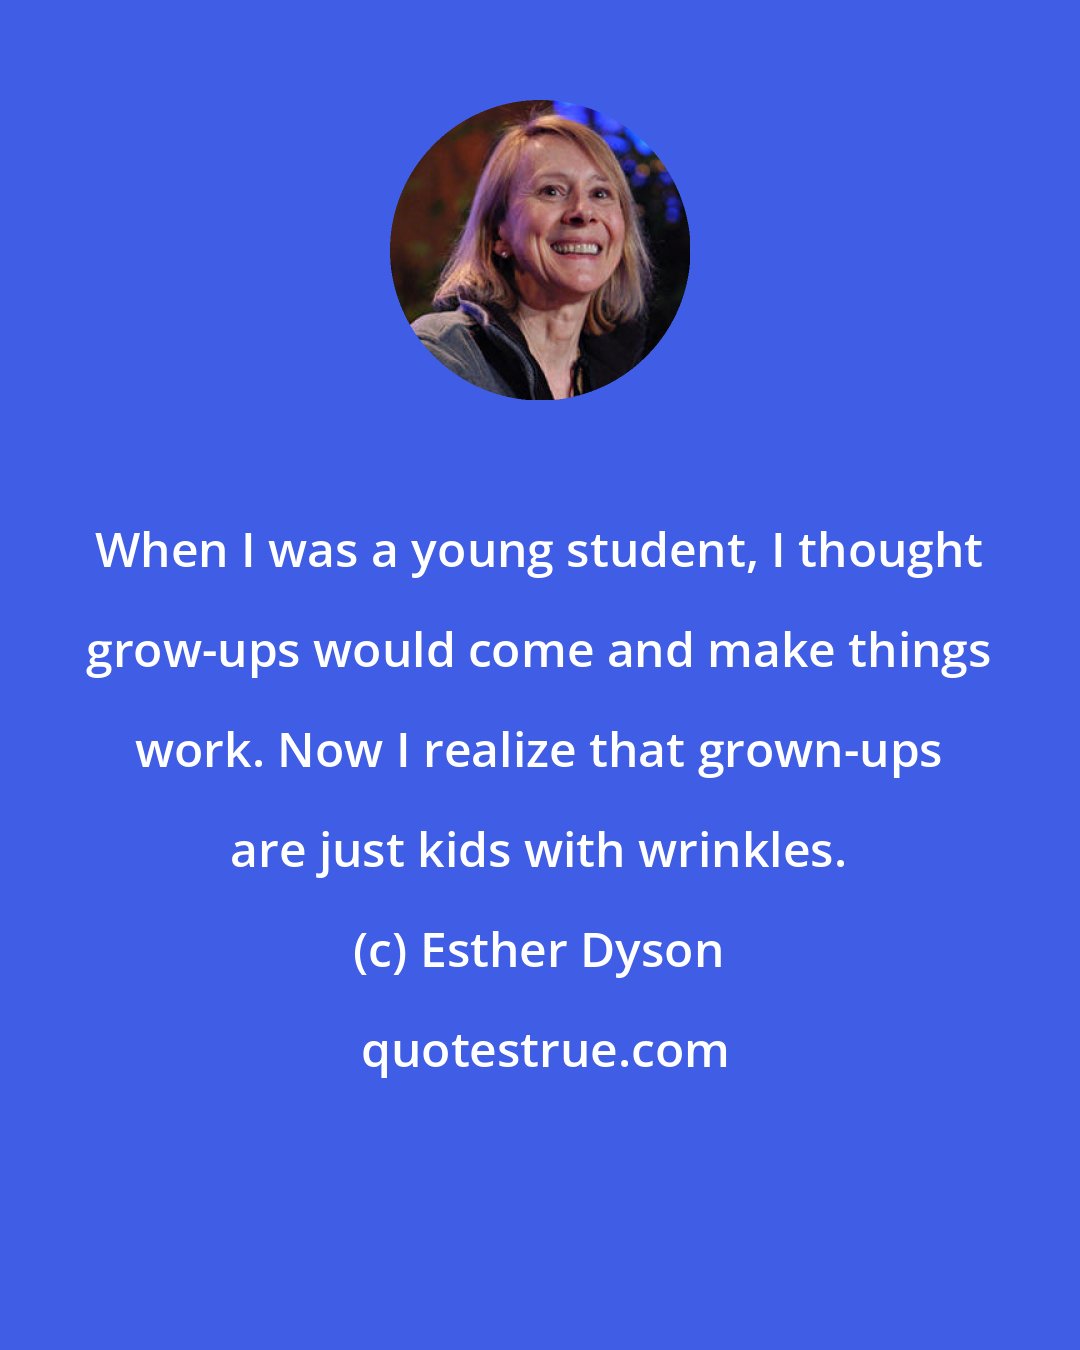 Esther Dyson: When I was a young student, I thought grow-ups would come and make things work. Now I realize that grown-ups are just kids with wrinkles.